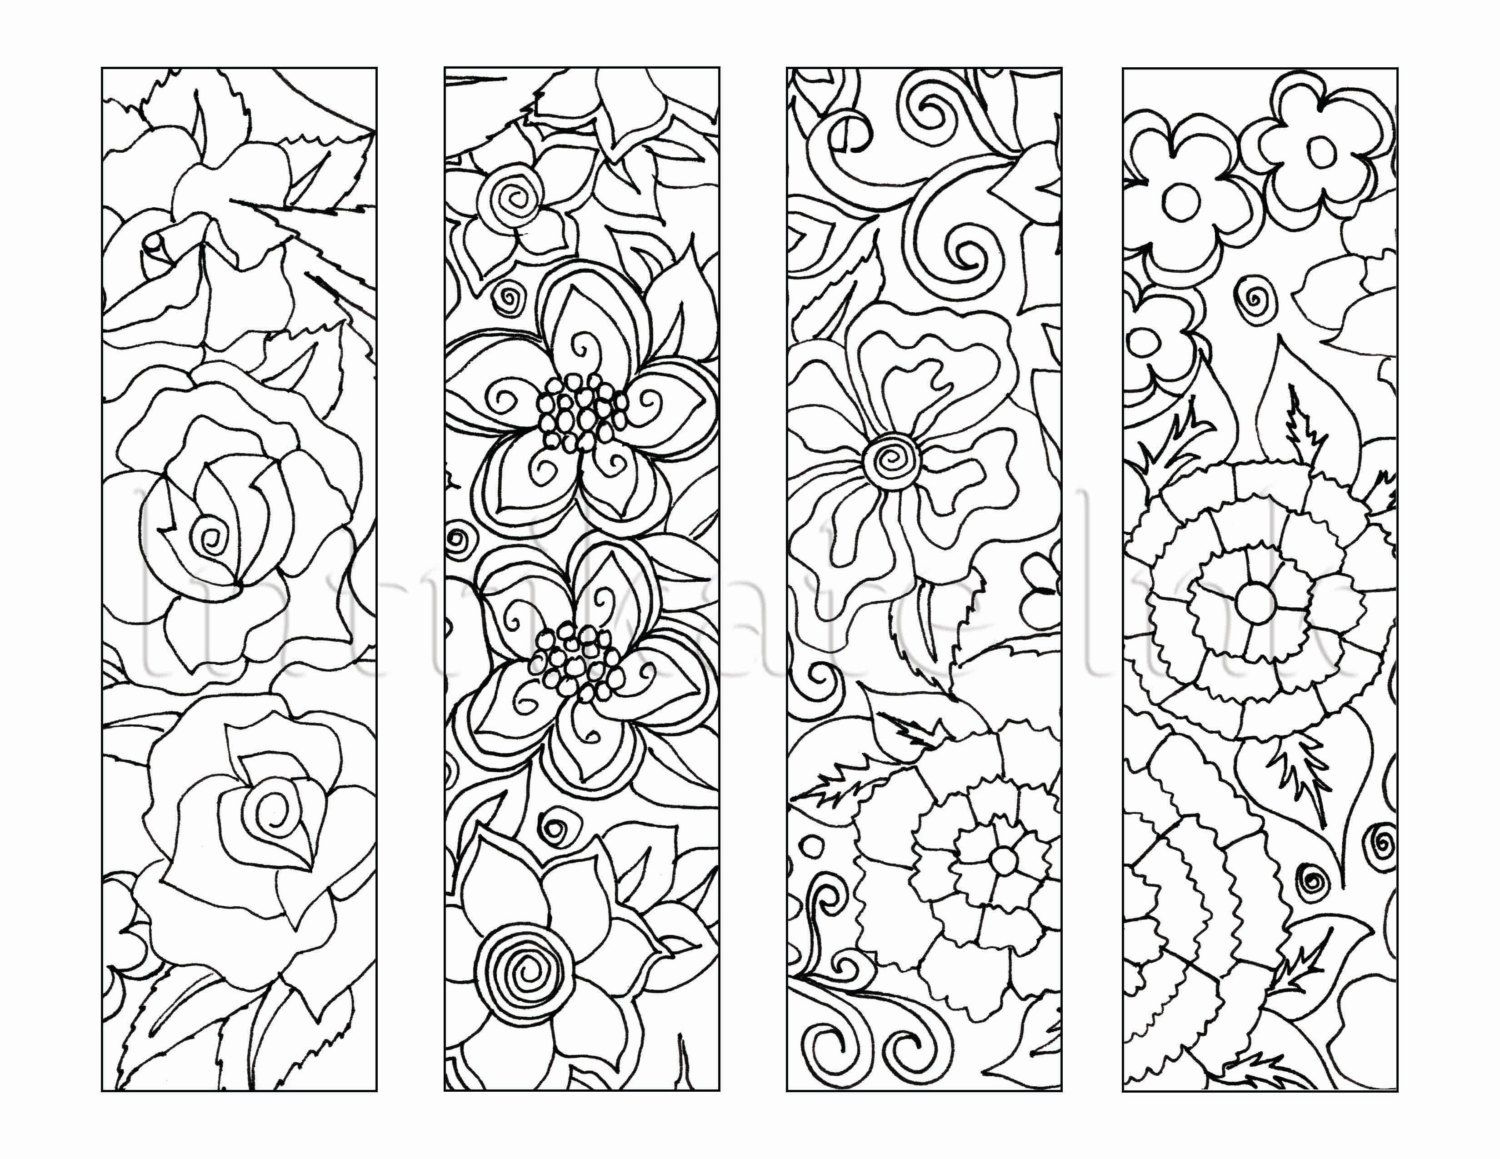 Related Image Coloring Bookmarks Coloring Bookmarks Free Coloring Books